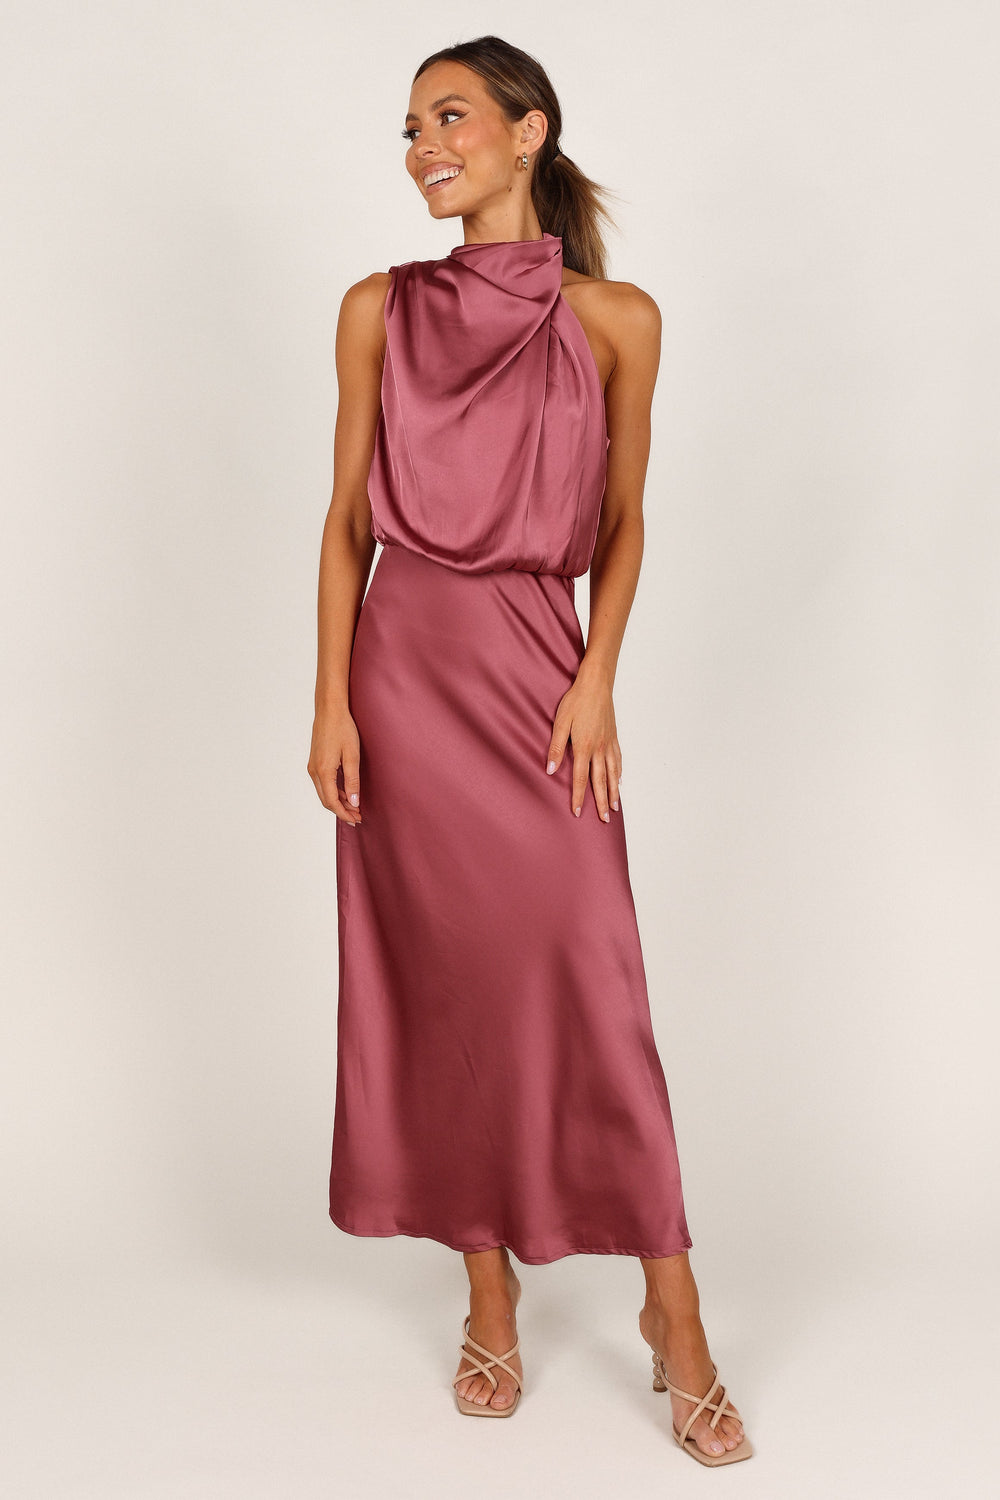 Petal and Pup USA DRESSES Anabelle Halter Neck Maxi Dress - Dusty Rose